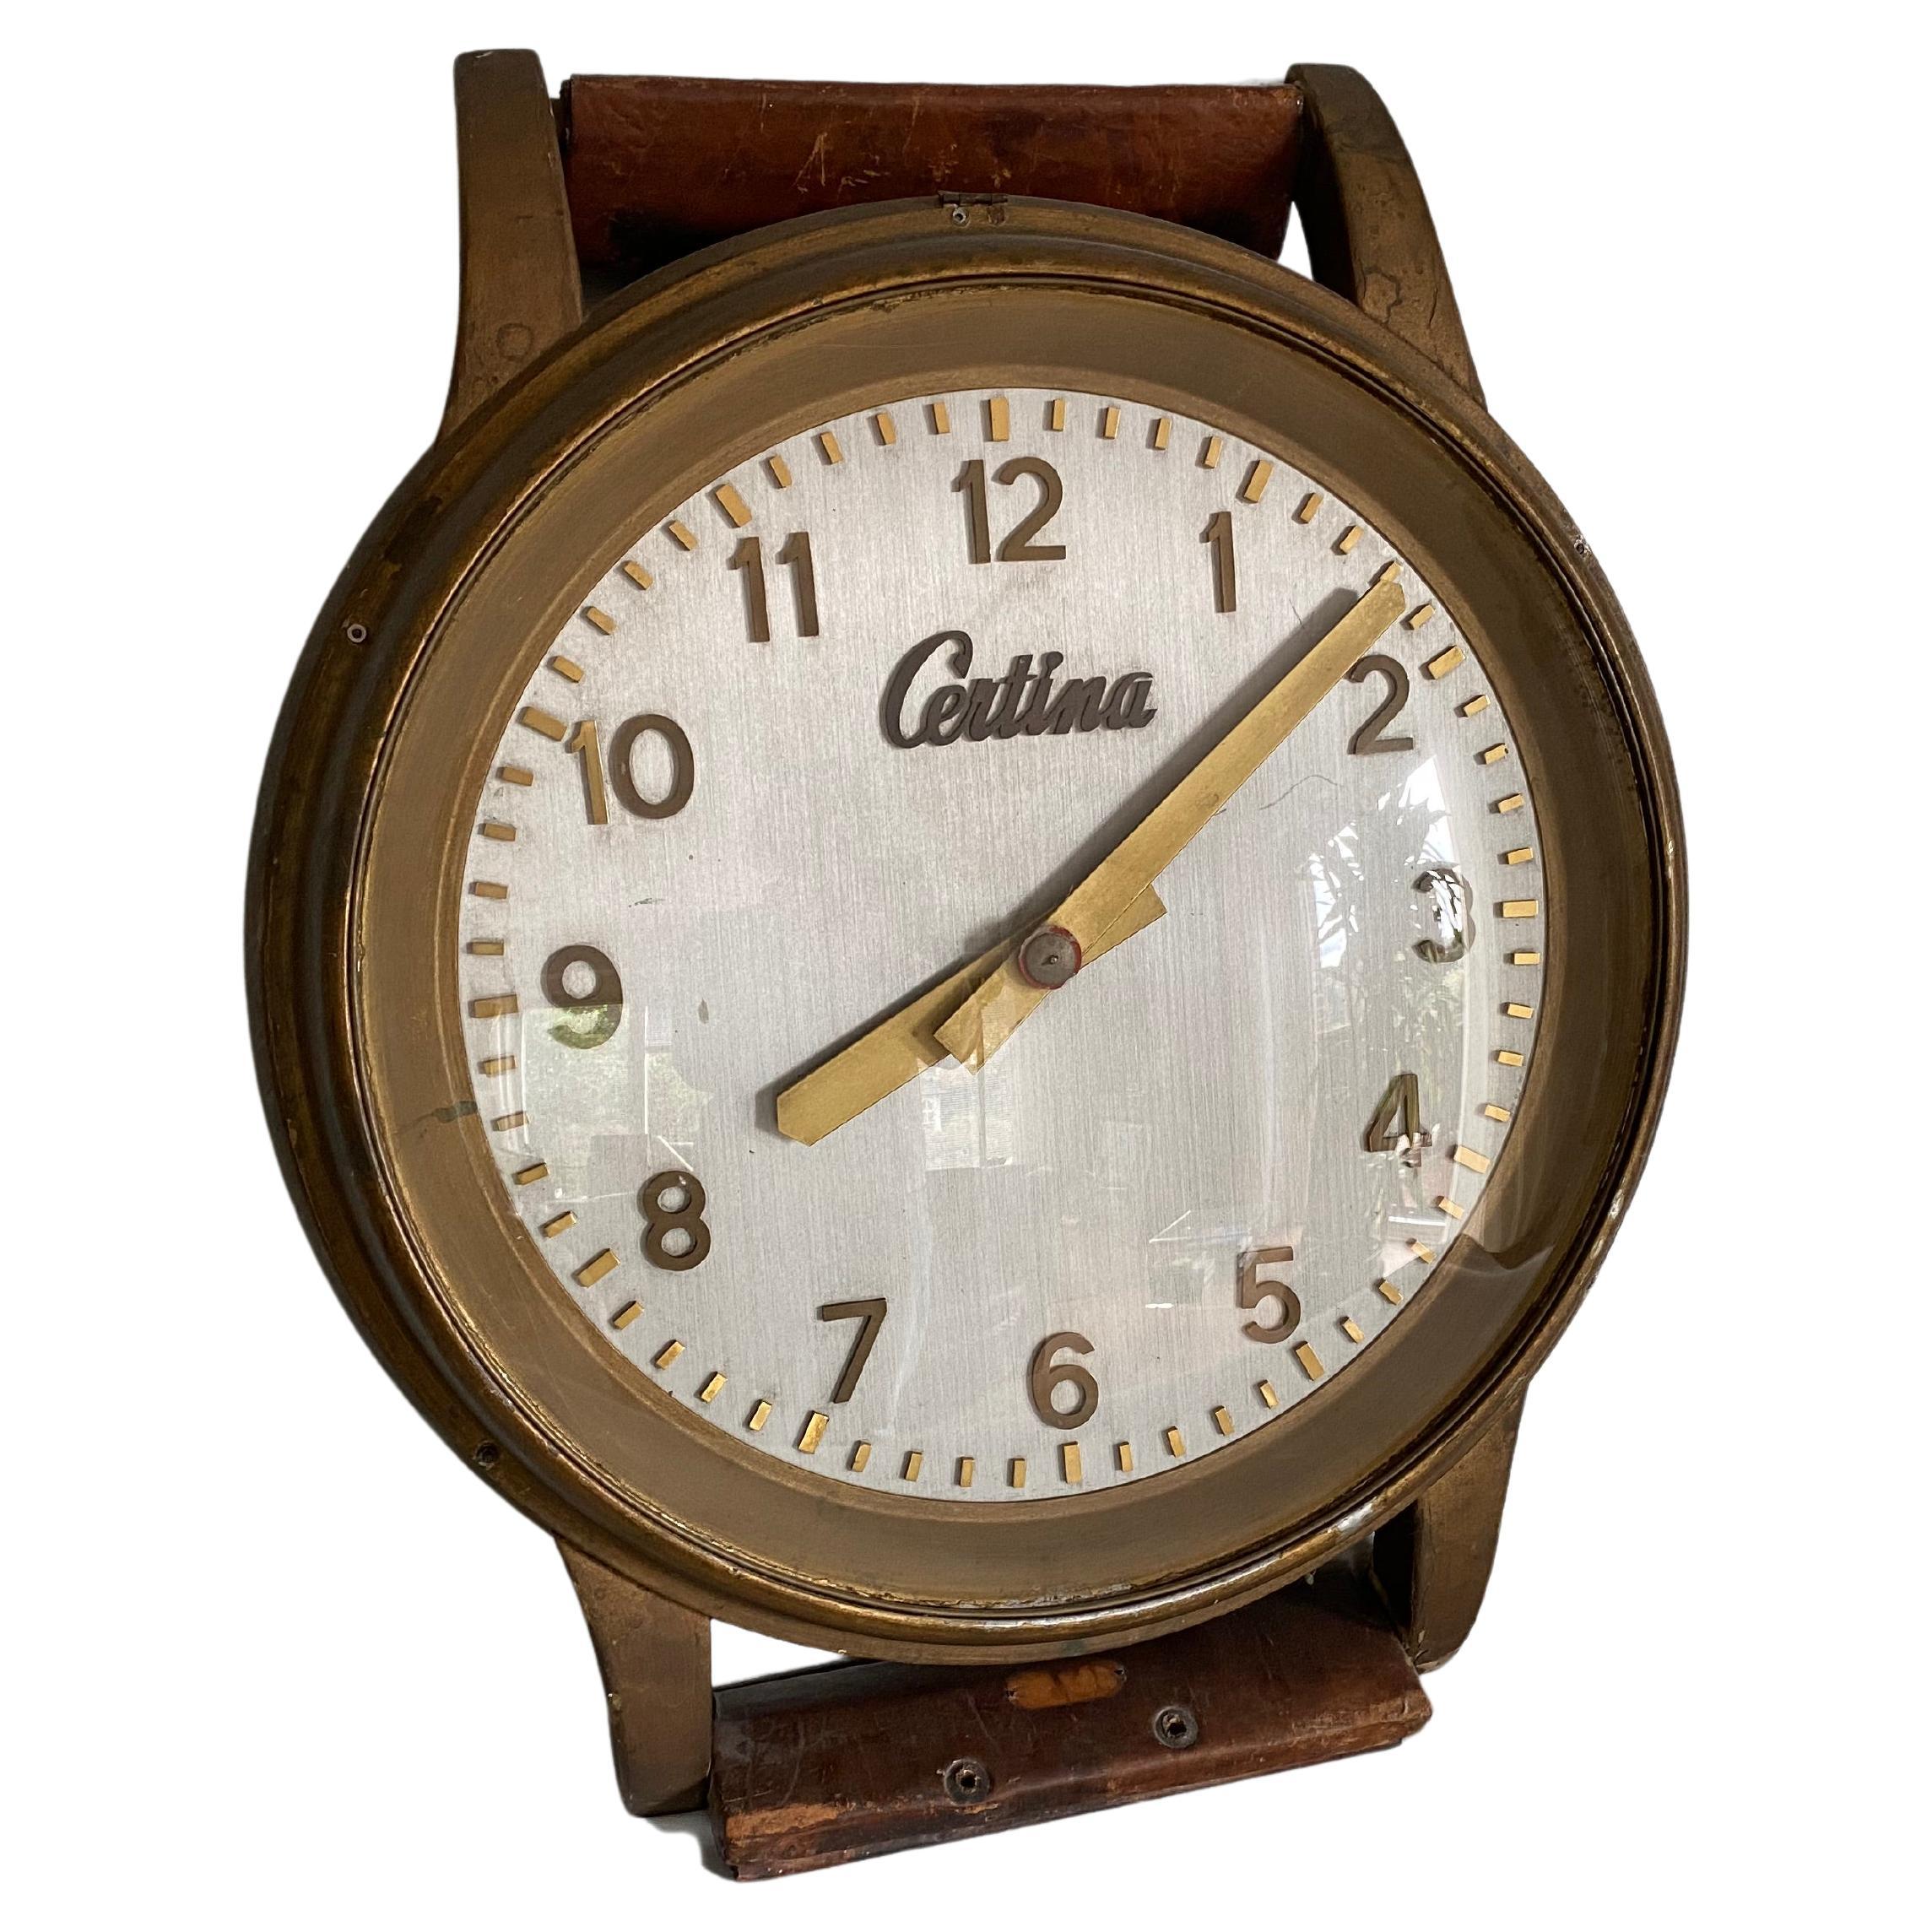 Large Antique Advertisement Wristwatch of the Swiss Watchmaker "Certina"